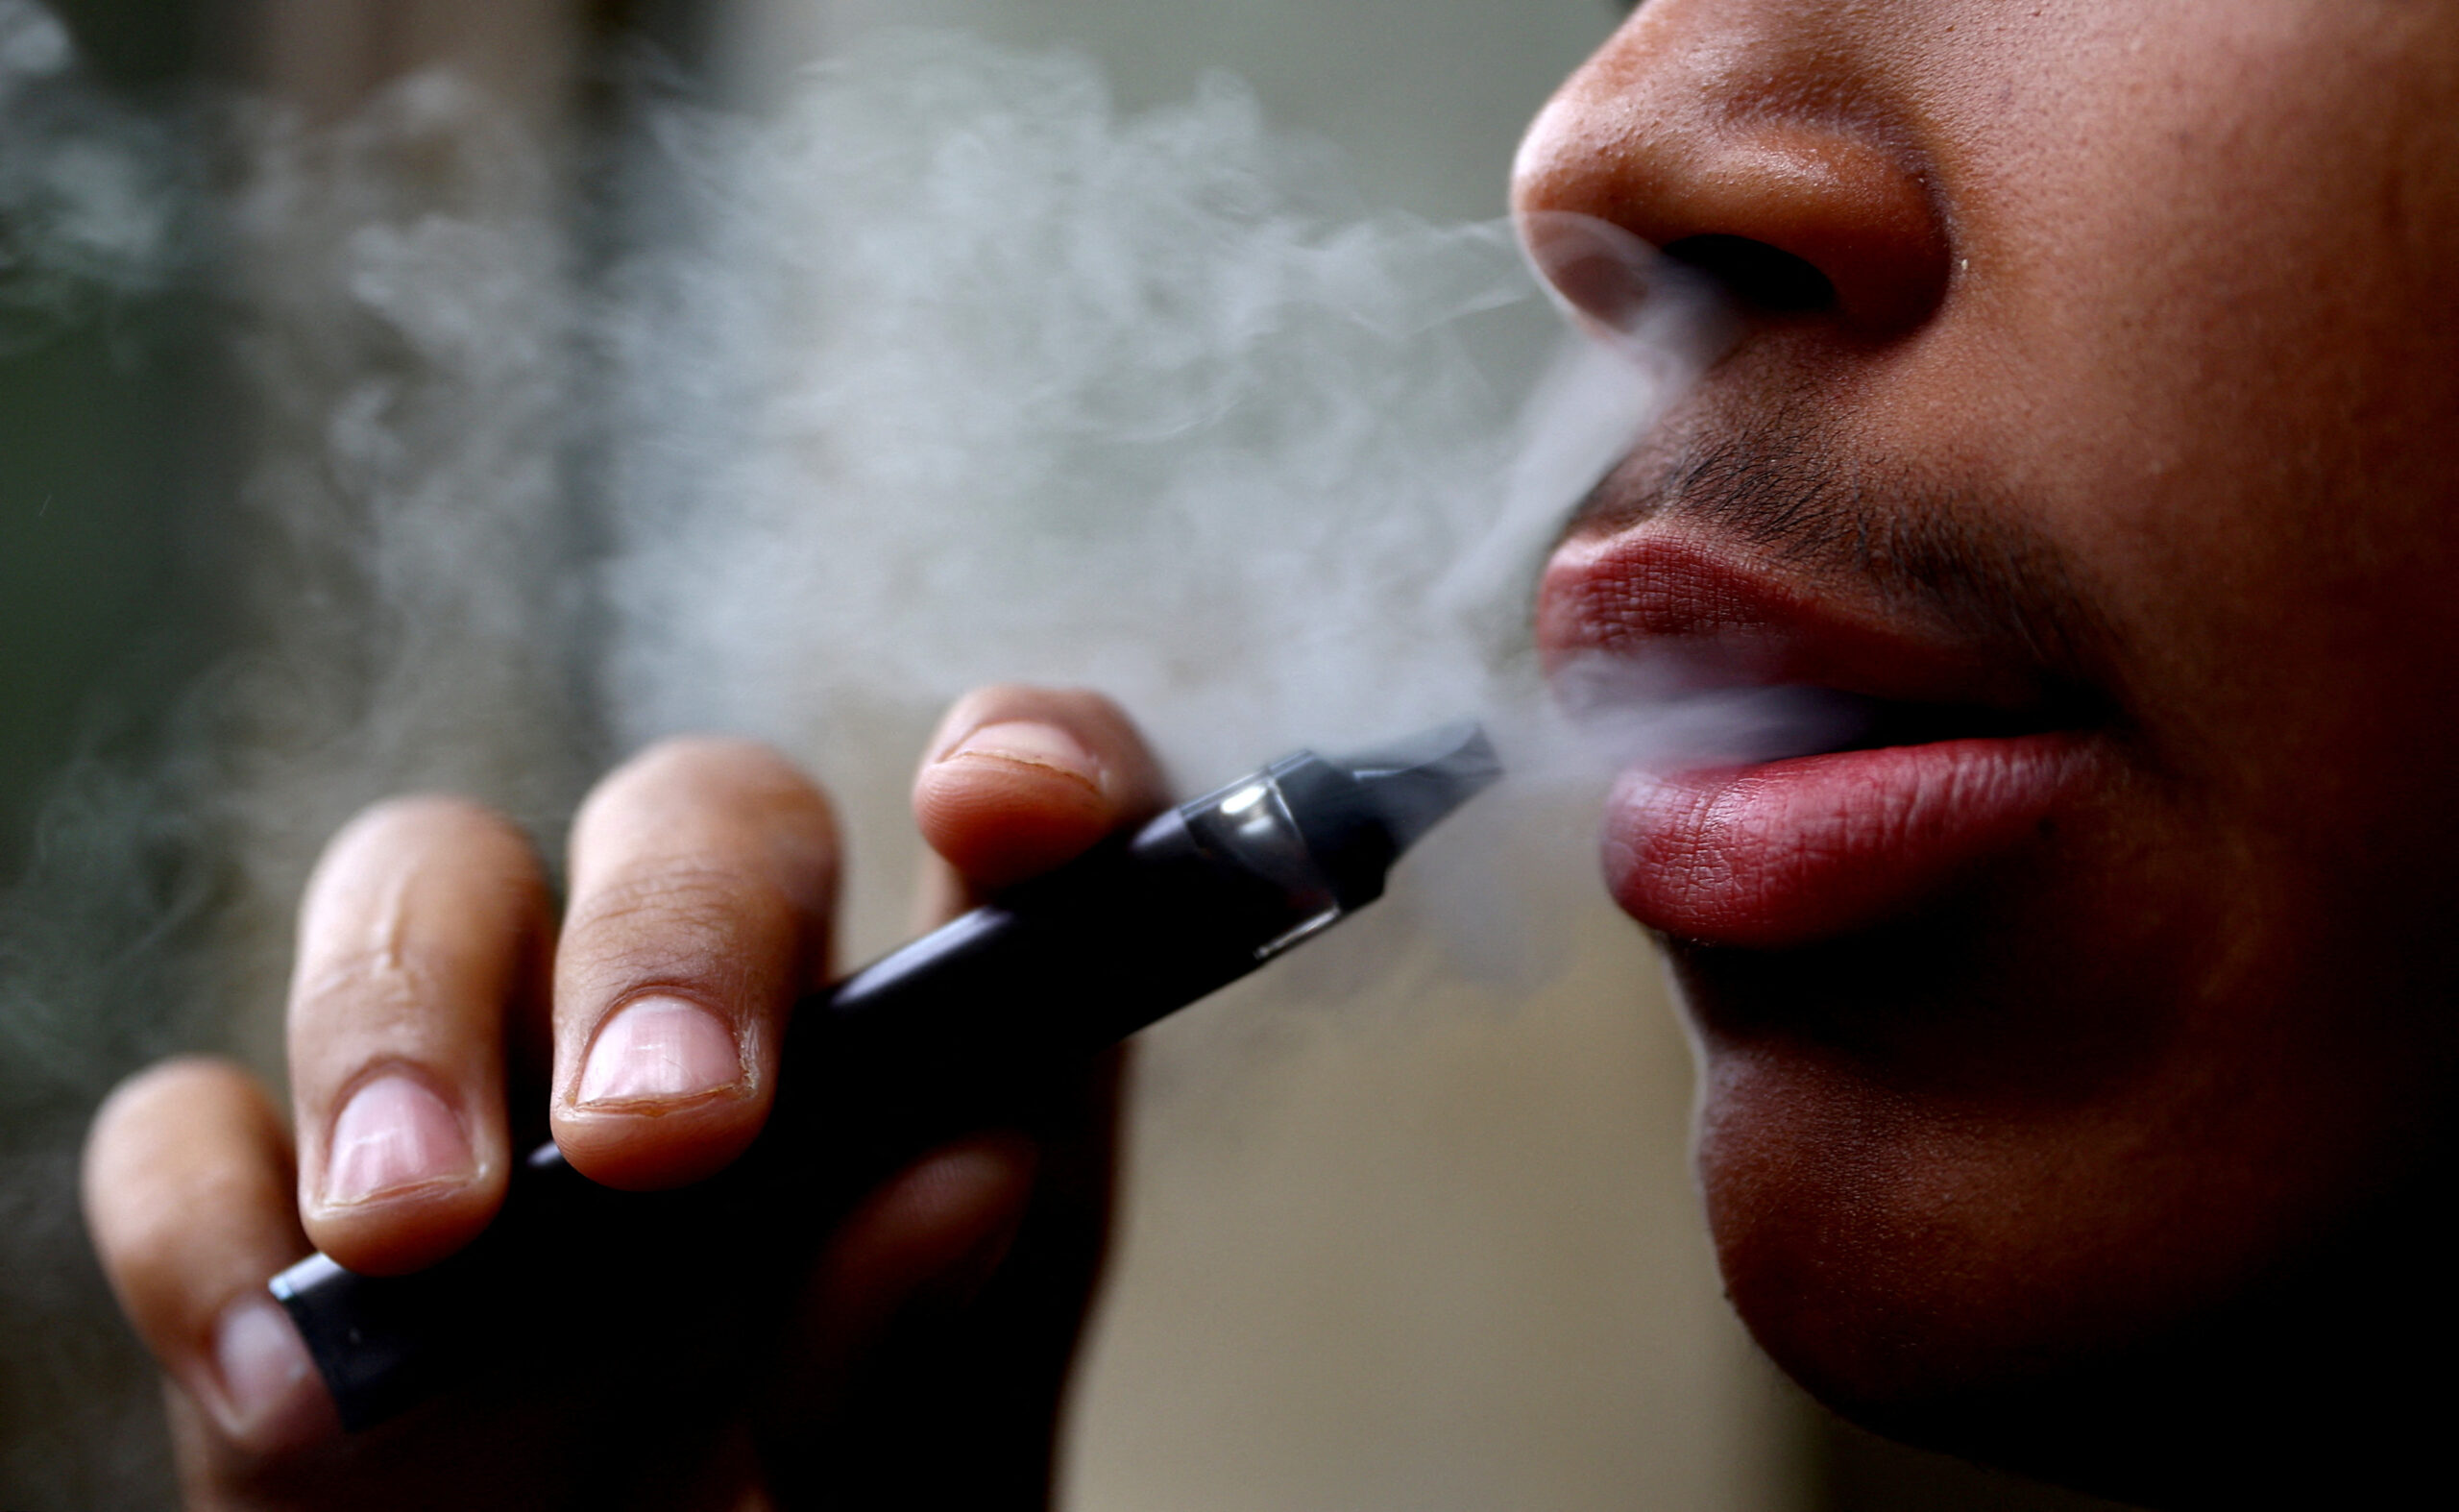 UK Takes Action: Banning Disposable Vapes to Safeguard Youth